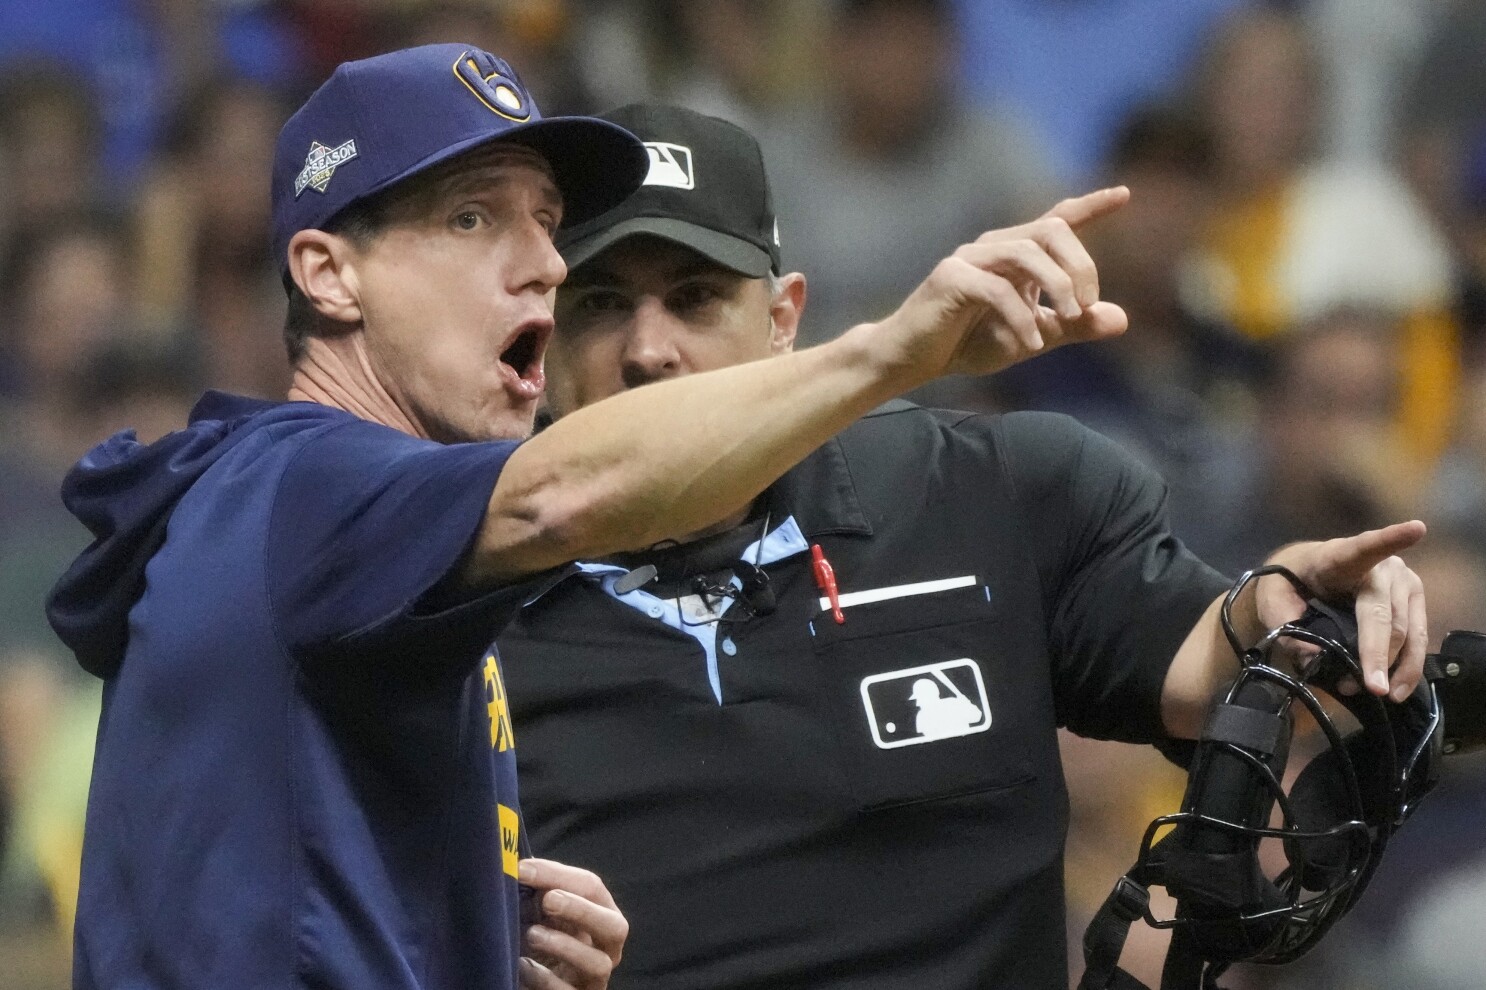 Craig Counsell might be the hottest MLB free agent not named